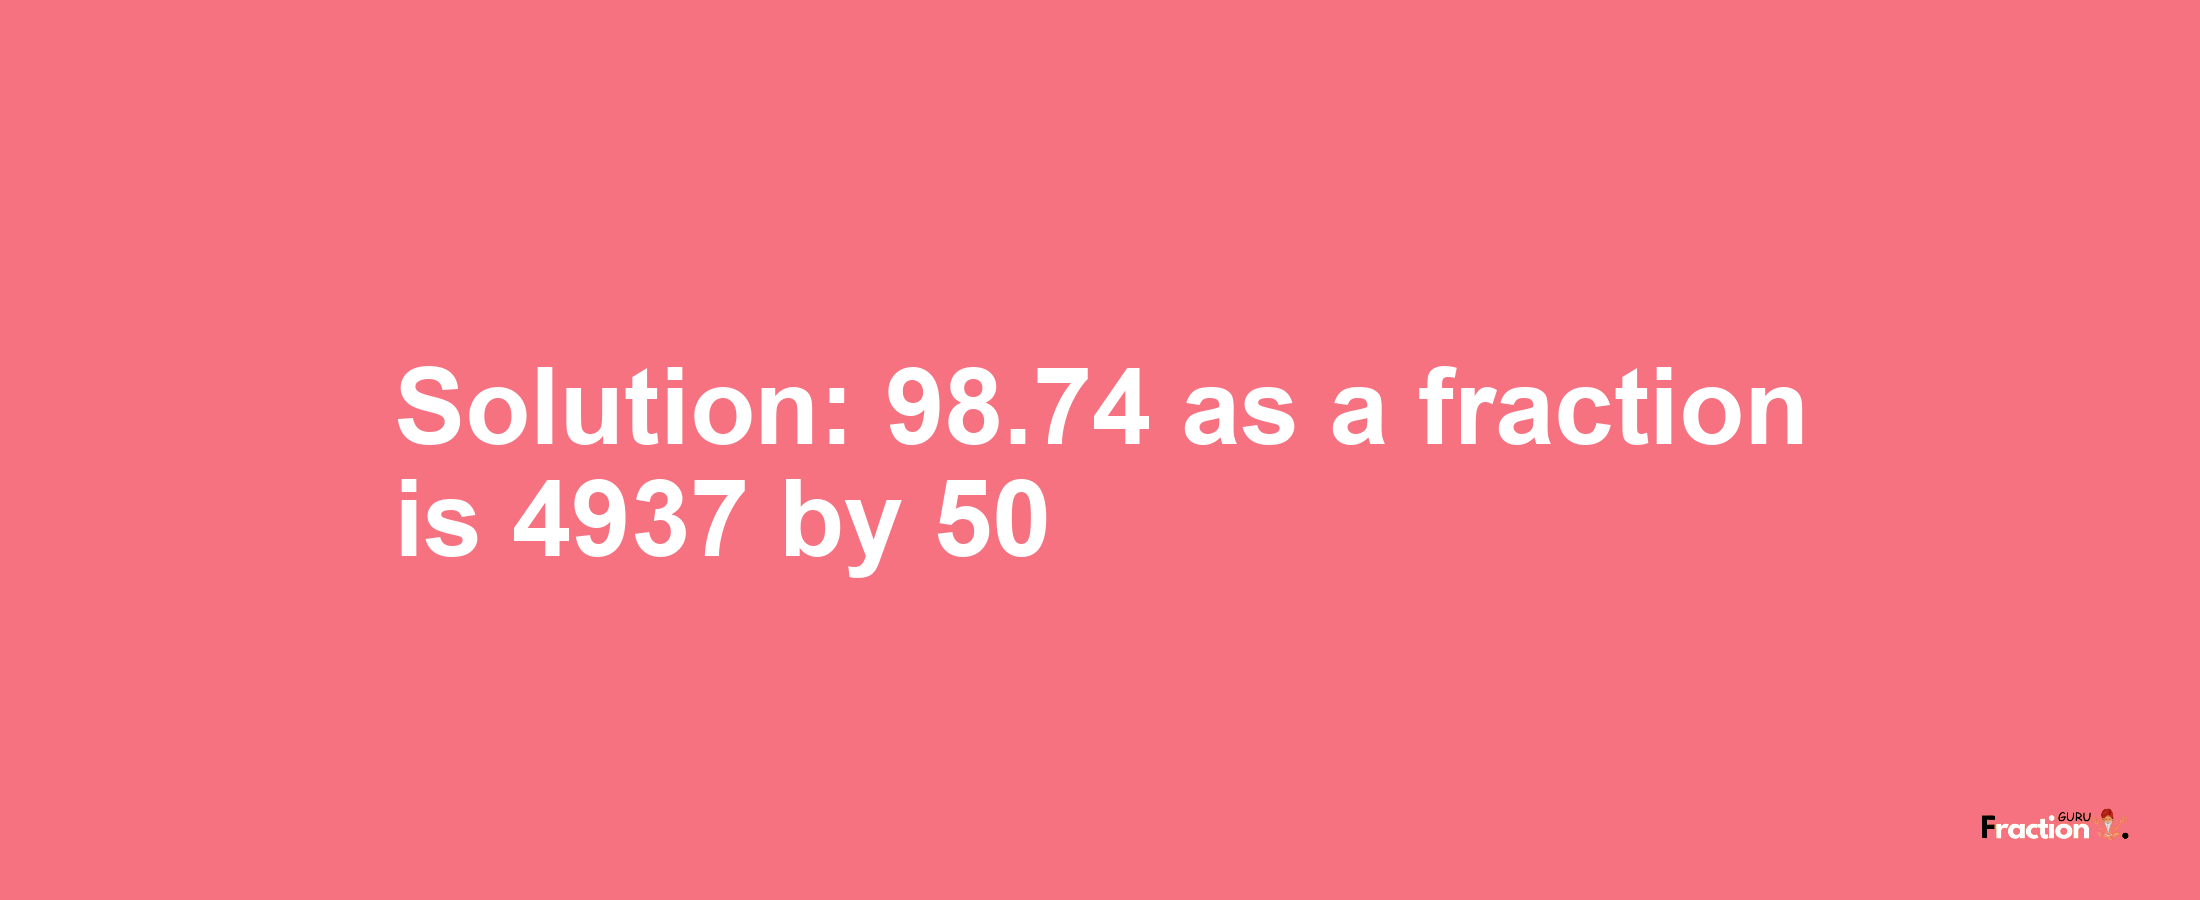 Solution:98.74 as a fraction is 4937/50